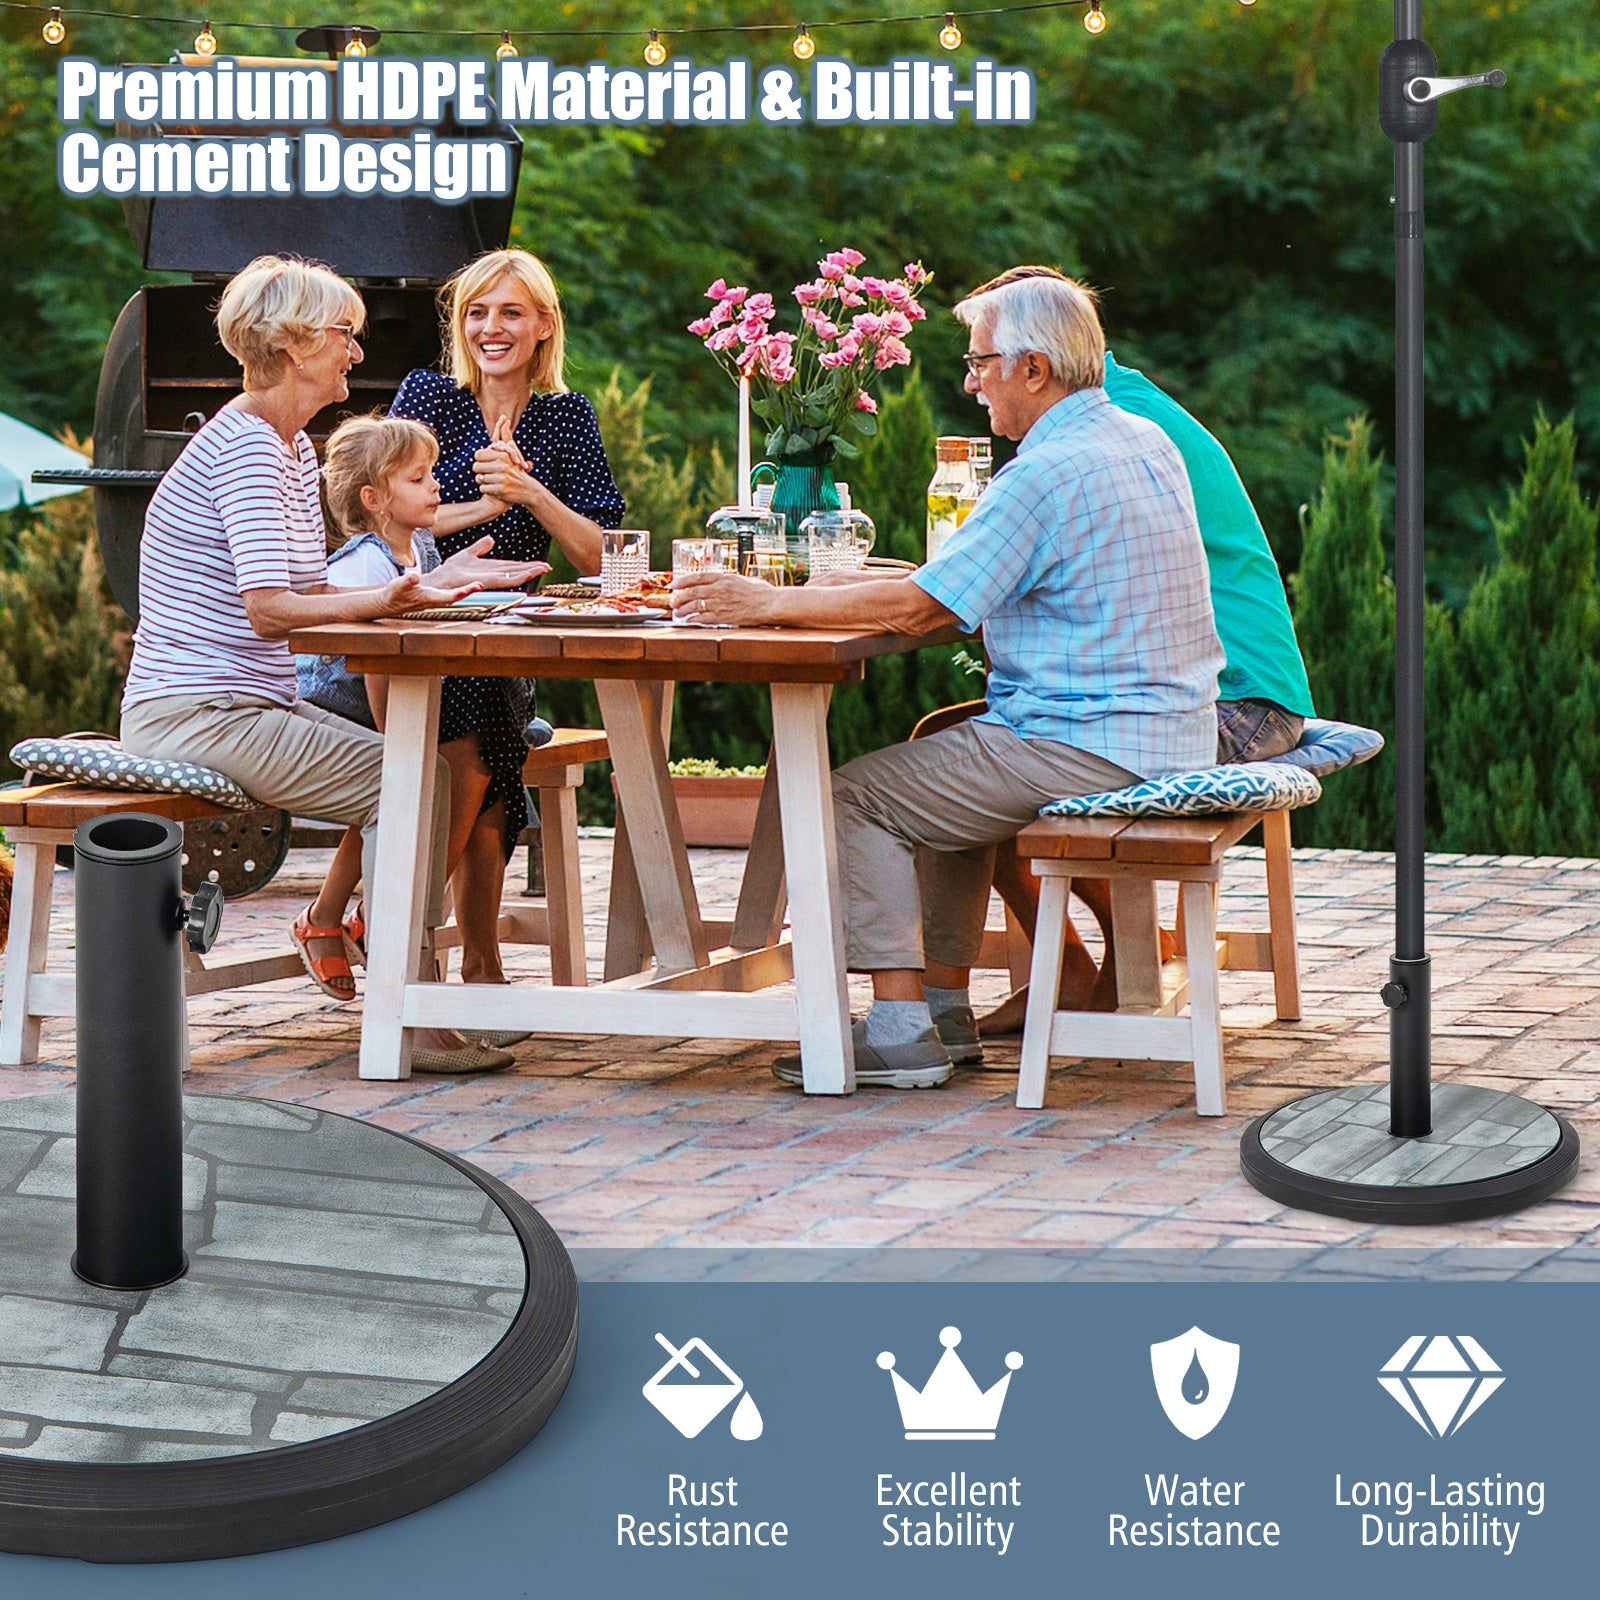 Sturdy HDPE Construction with Built-in Cement: Constructed from high-quality HDPE material, this umbrella base is resistant to sun and water, ensuring durability. The built-in cement design provides stability and prevents wobbling.